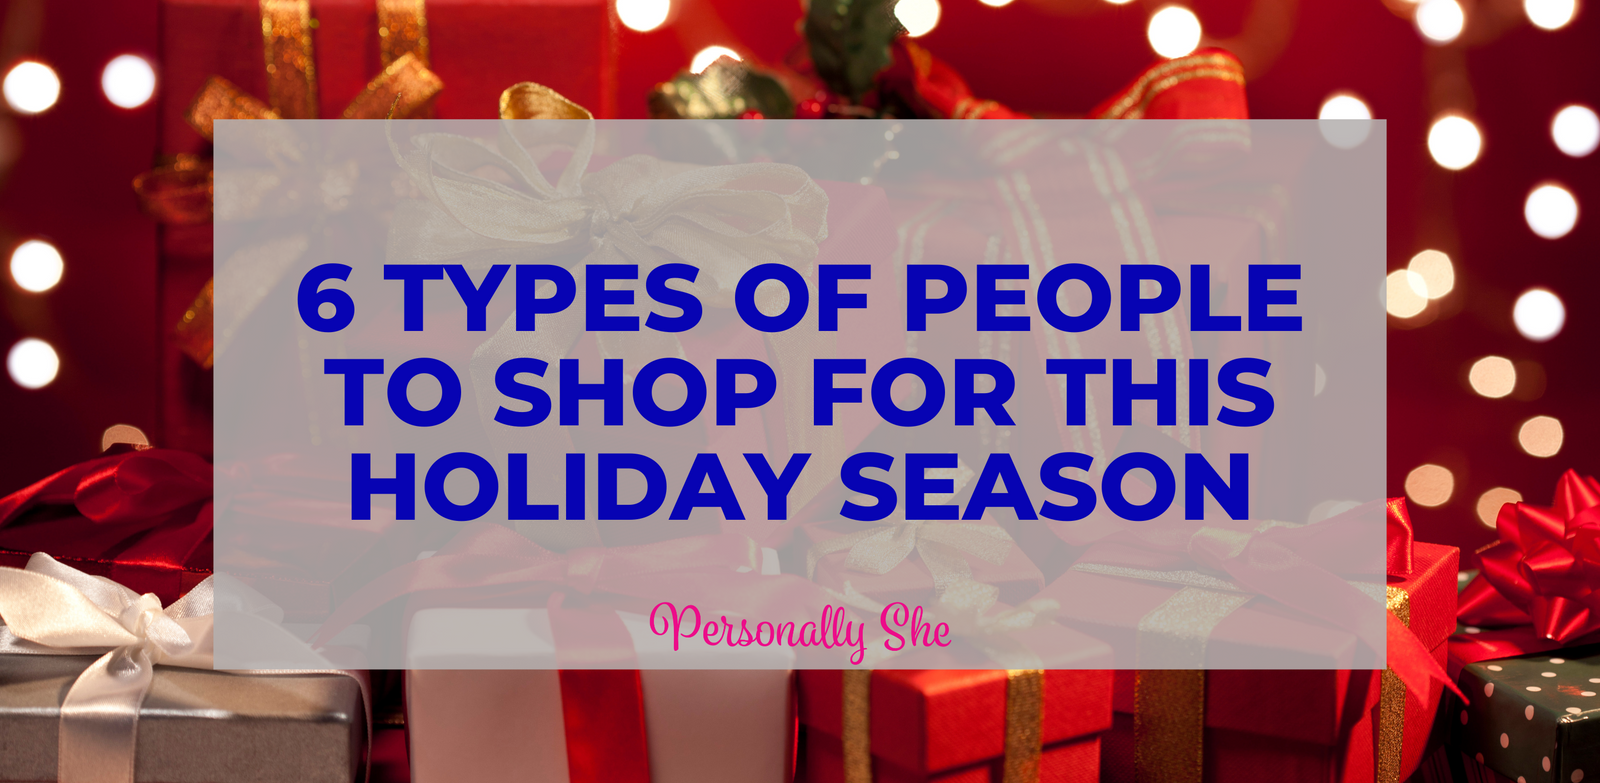 6 Types of People to Shop for this Holiday Season